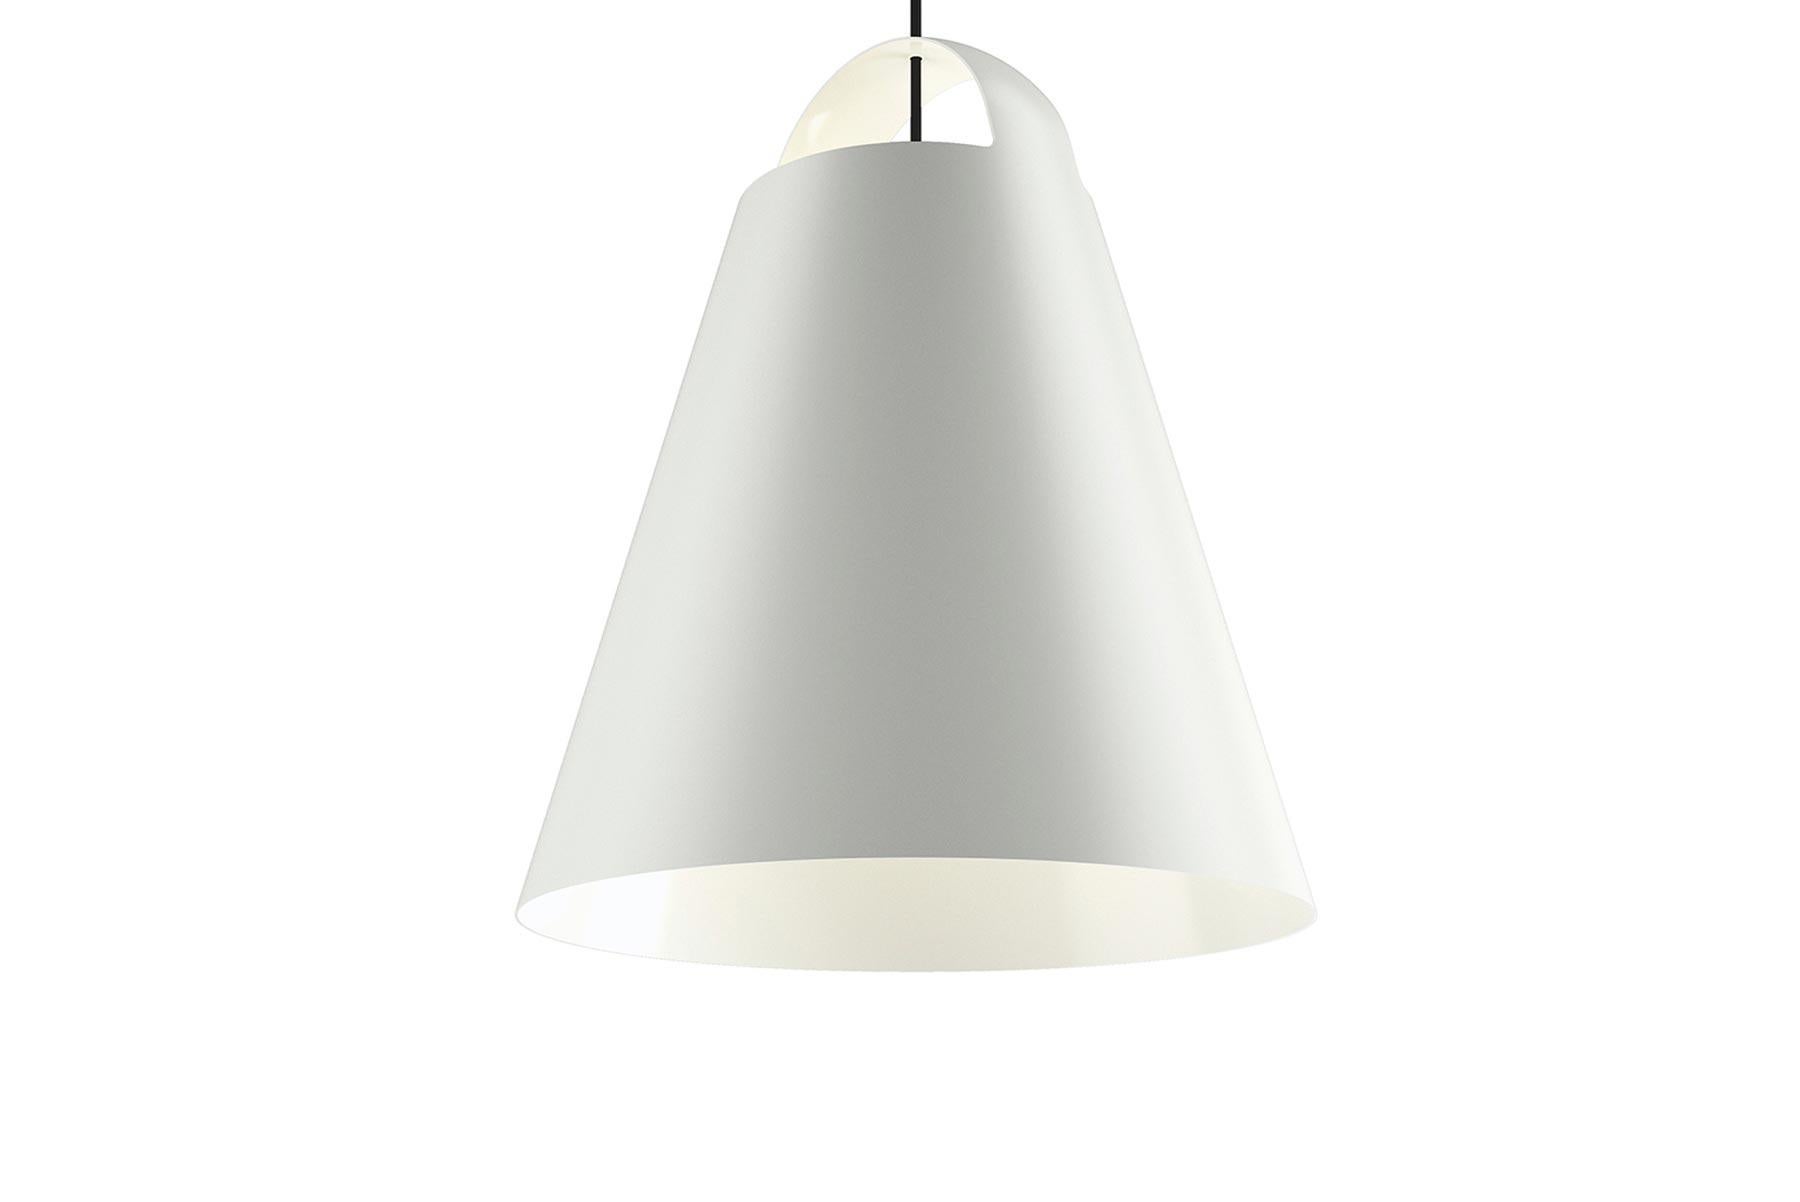 The Above pendant by Danish designer Mads Odgård represents an overtly simplistic lighting design. The designer himself is a Minimalist to the core and creates understandable products, where function is valued to the same degree as form and quality.